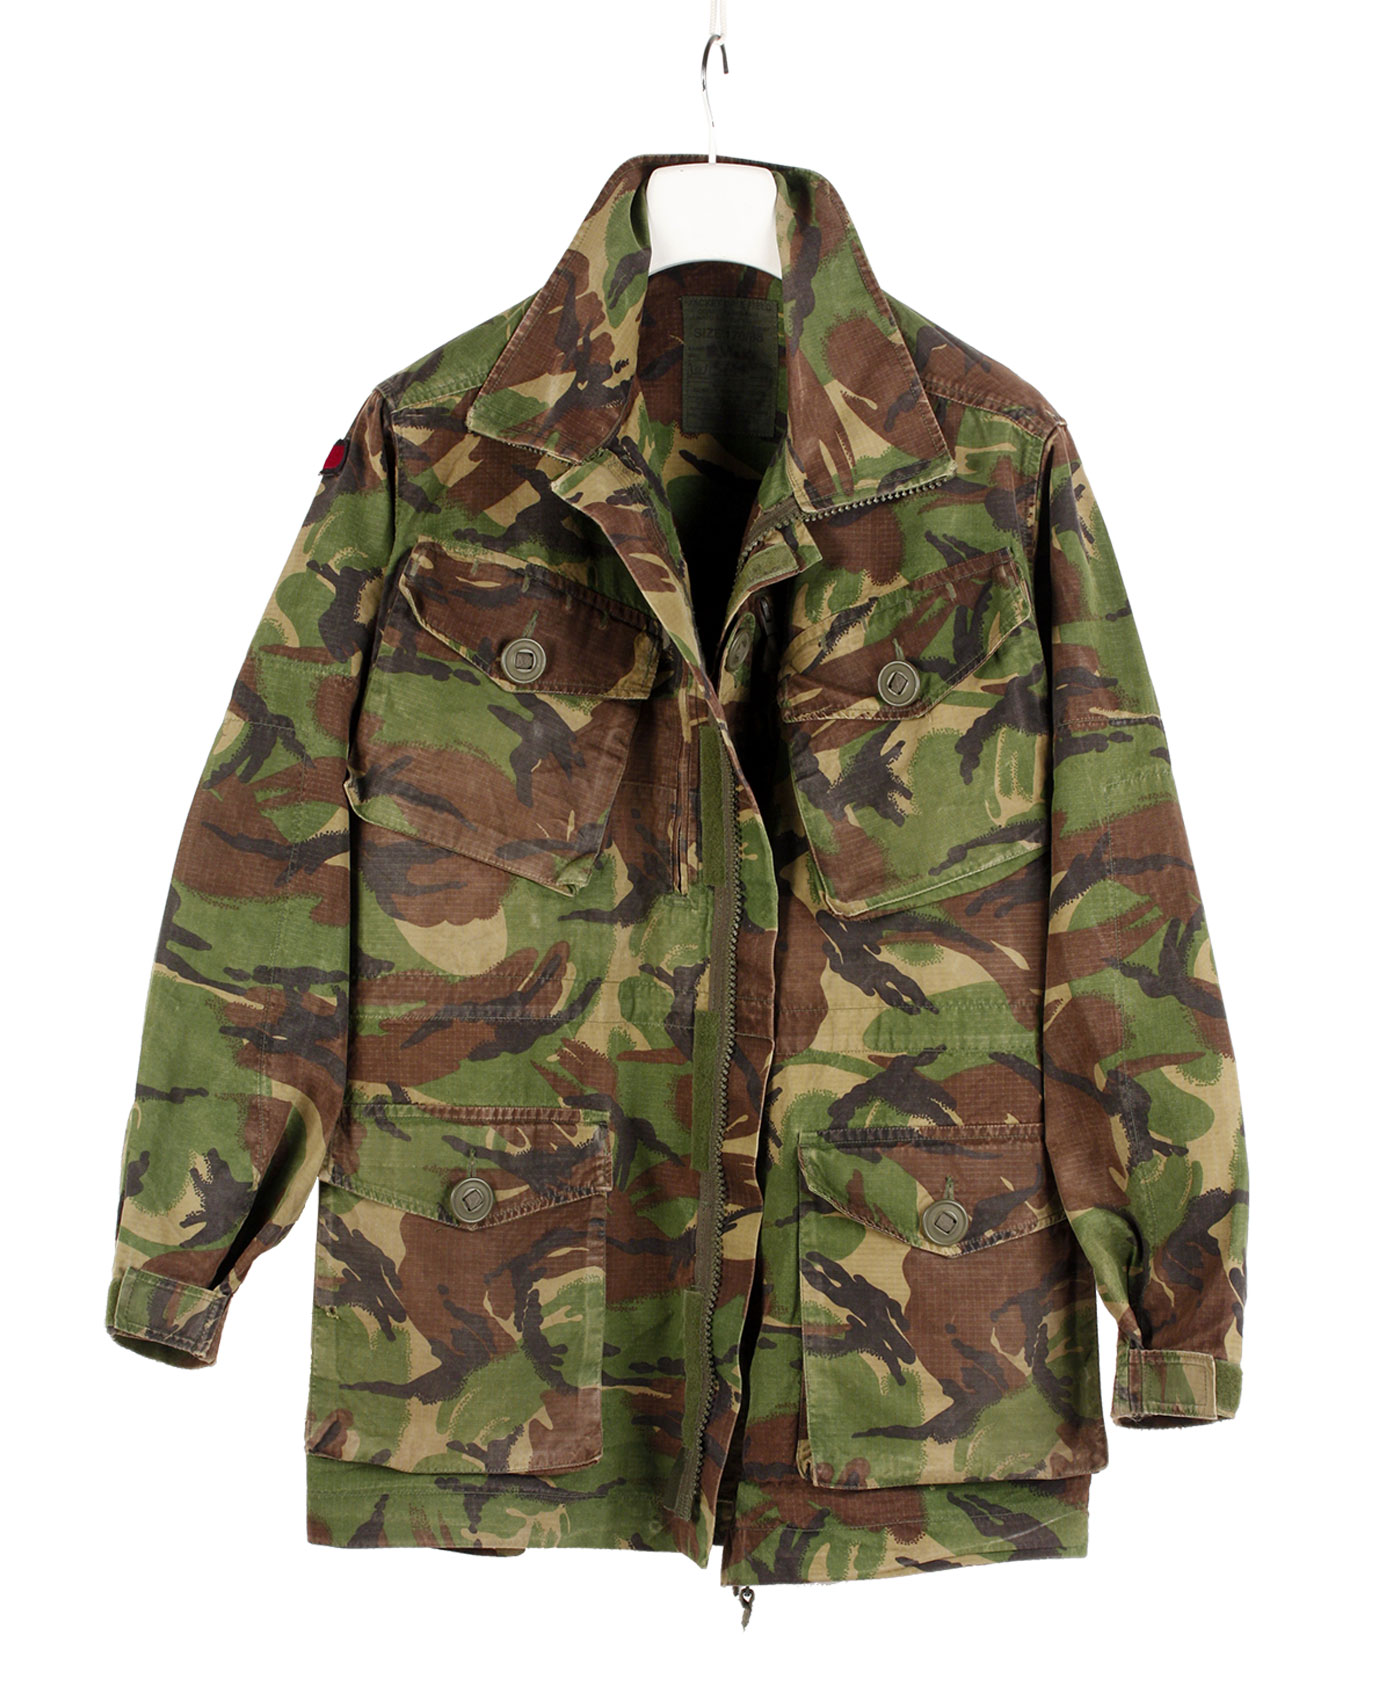 Military Camouflage Field Jacket '60/70s